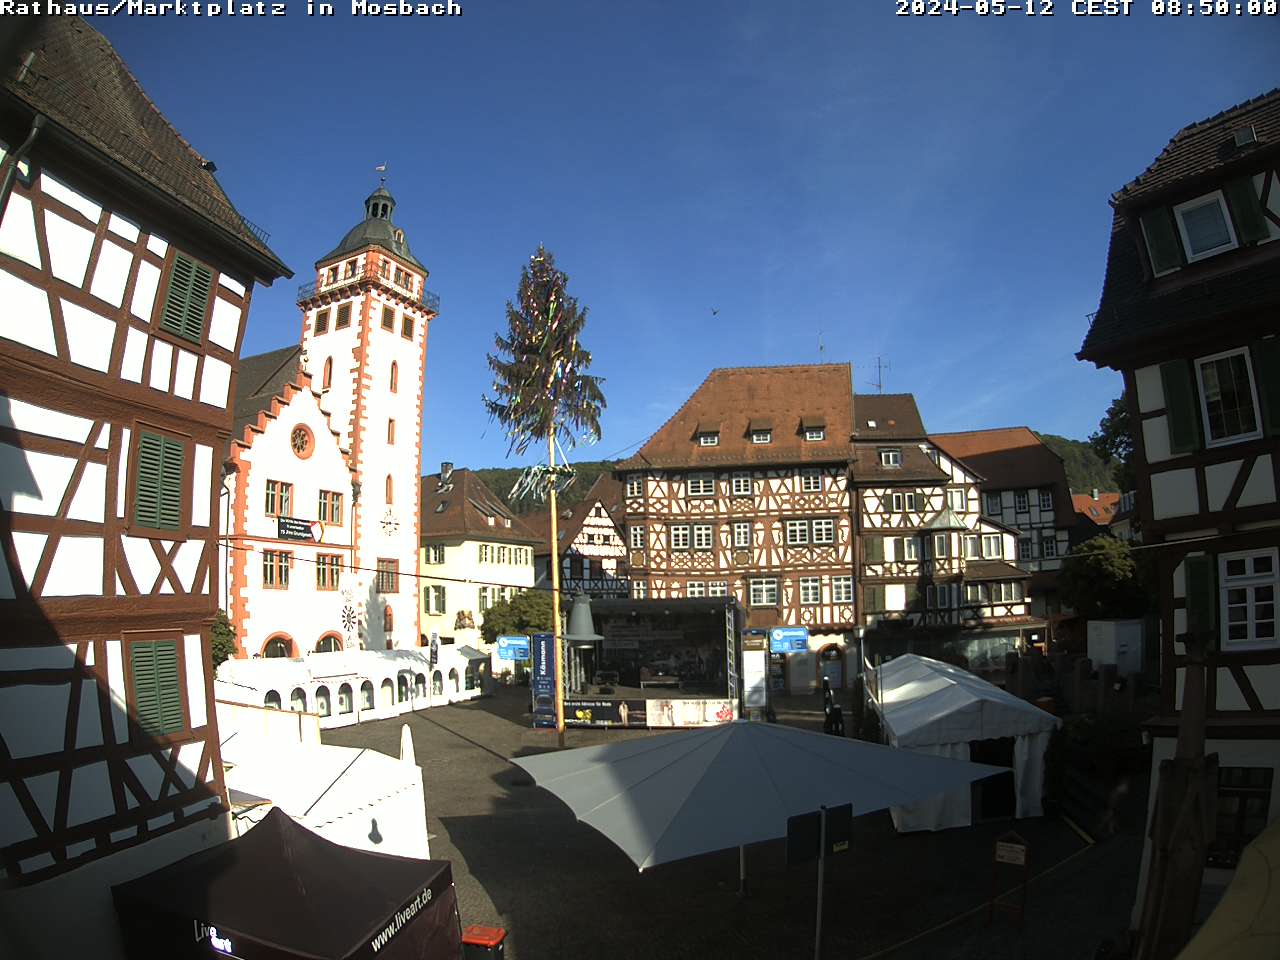 Mosbach Fre. 08:54